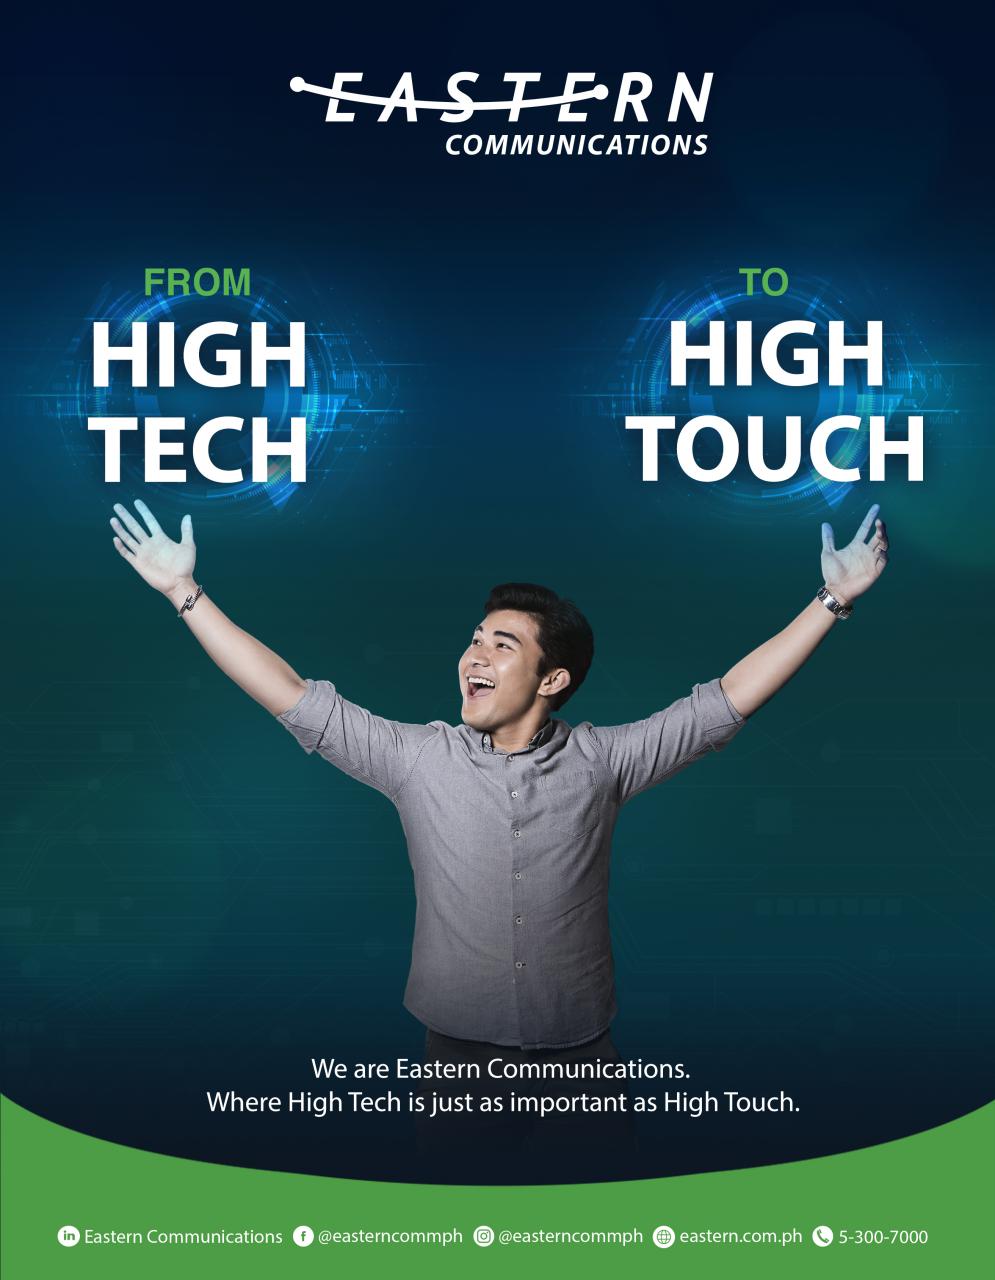 Championing high tech and high touch in the digital age